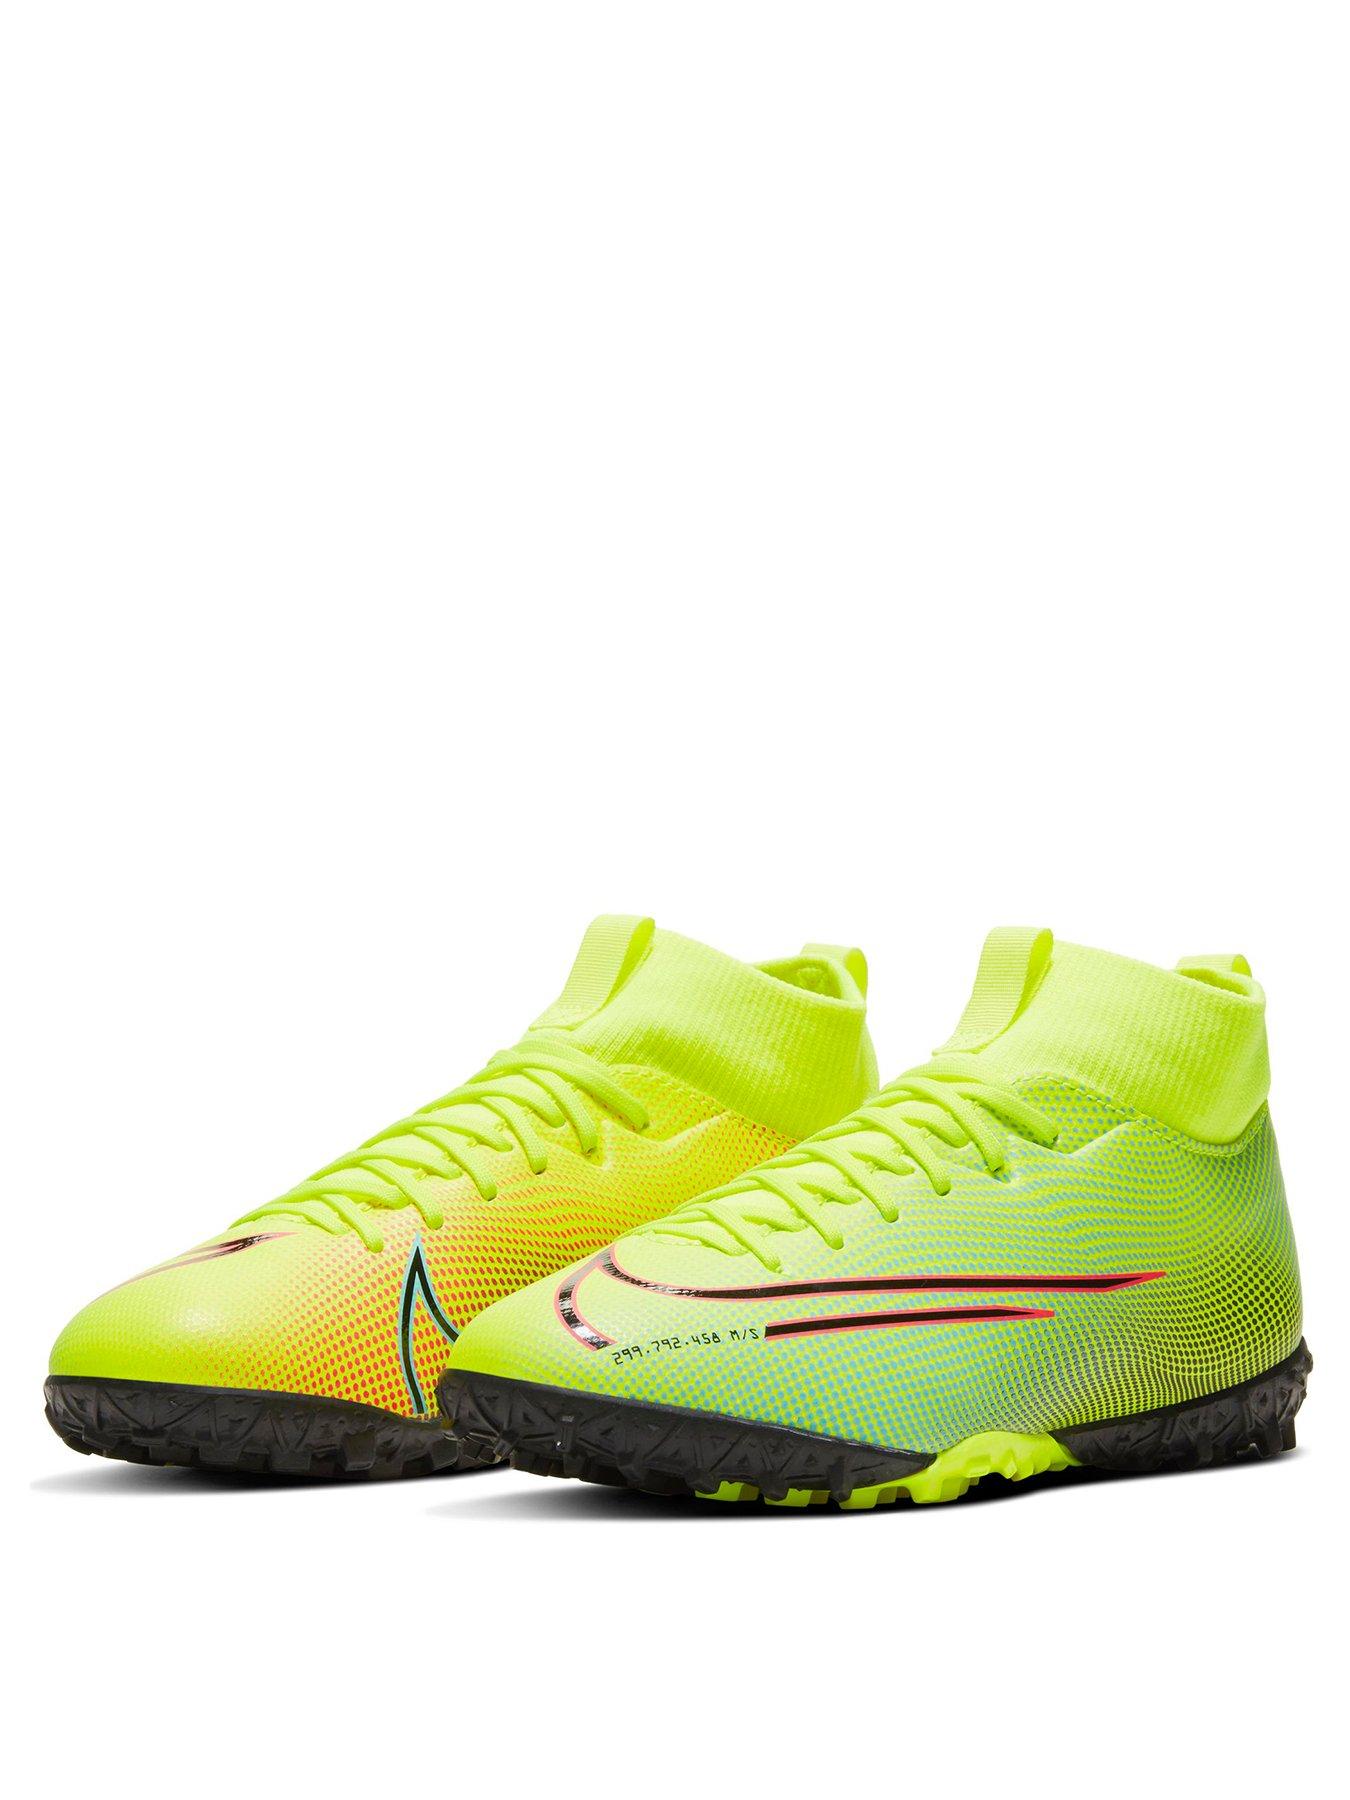 Nike Mercurial Superfly 6 Academy Football Boots Rugs White.